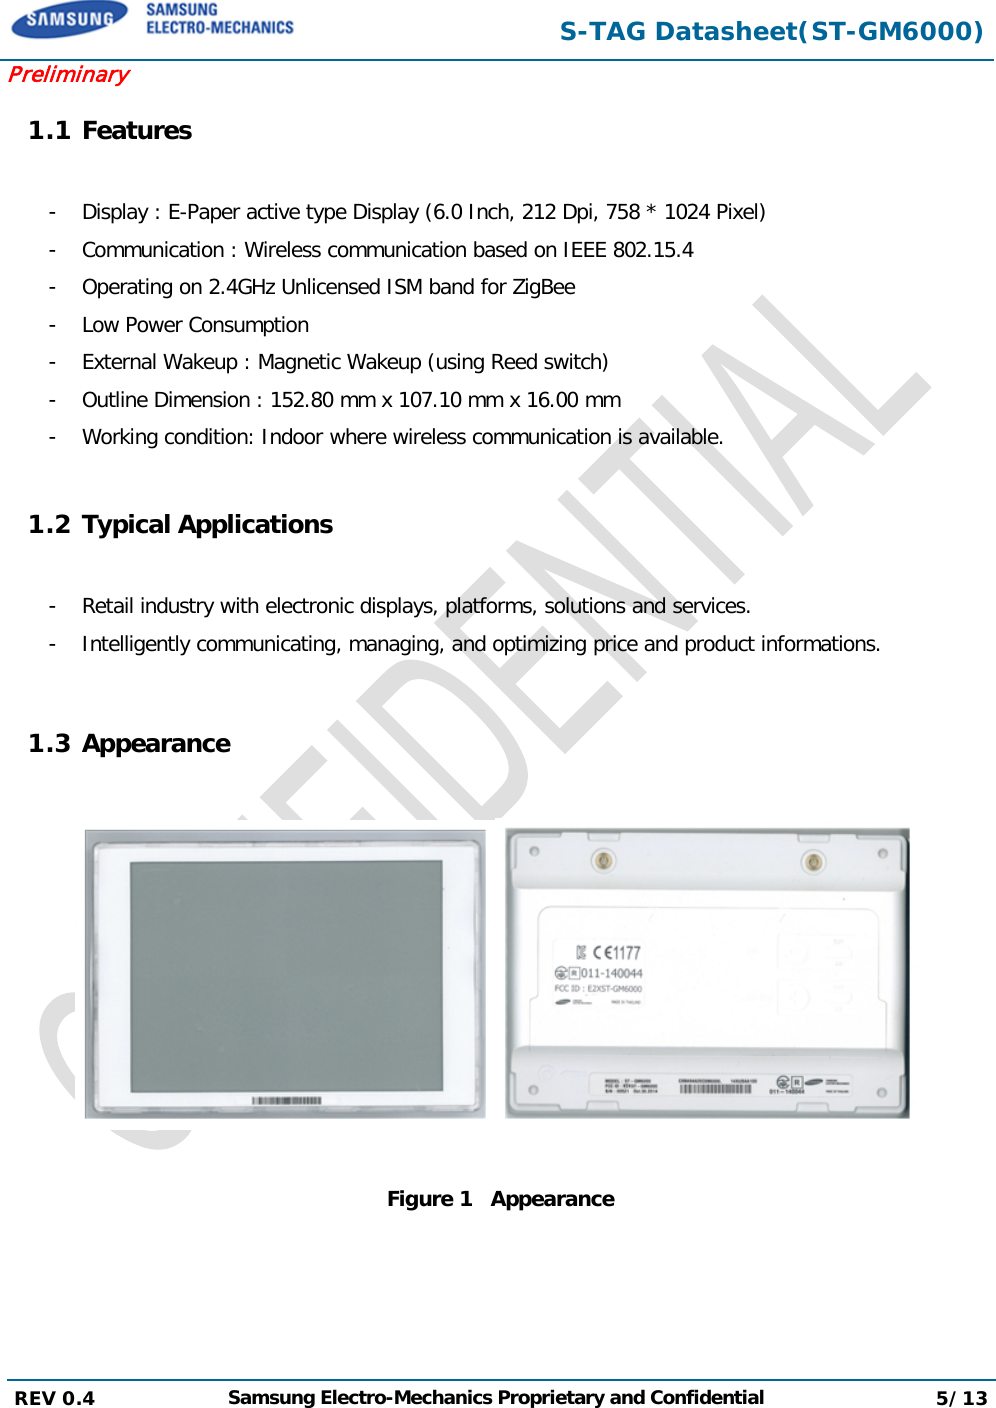  S-TAG Datasheet(ST-GM6000) Preliminary 1.1 Features  -  Display : E-Paper active type Display (6.0 Inch, 212 Dpi, 758 * 1024 Pixel) -  Communication : Wireless communication based on IEEE 802.15.4 -  Operating on 2.4GHz Unlicensed ISM band for ZigBee -  Low Power Consumption -  External Wakeup : Magnetic Wakeup (using Reed switch) -  Outline Dimension : 152.80 mm x 107.10 mm x 16.00 mm  -  Working condition: Indoor where wireless communication is available.  1.2 Typical Applications  -  Retail industry with electronic displays, platforms, solutions and services. -  Intelligently communicating, managing, and optimizing price and product informations.  1.3 Appearance      Figure 1   Appearance REV 0.4  Samsung Electro-Mechanics Proprietary and Confidential 5/13   